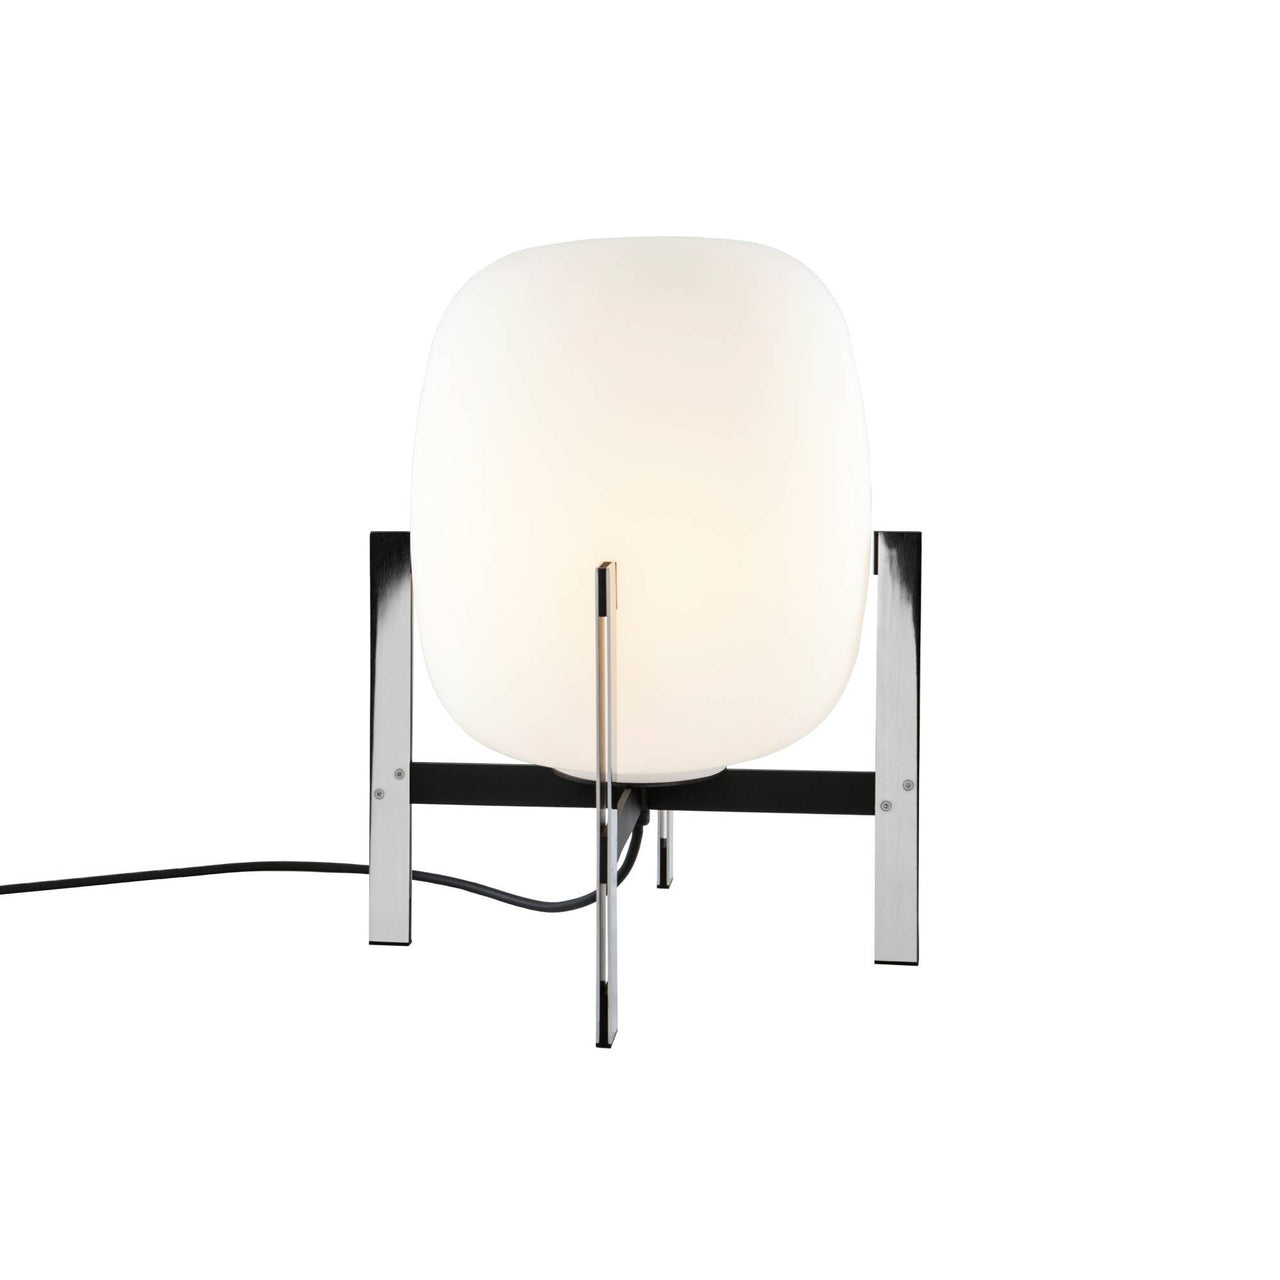 Cesta Metálica Table Lamp: Without Handle